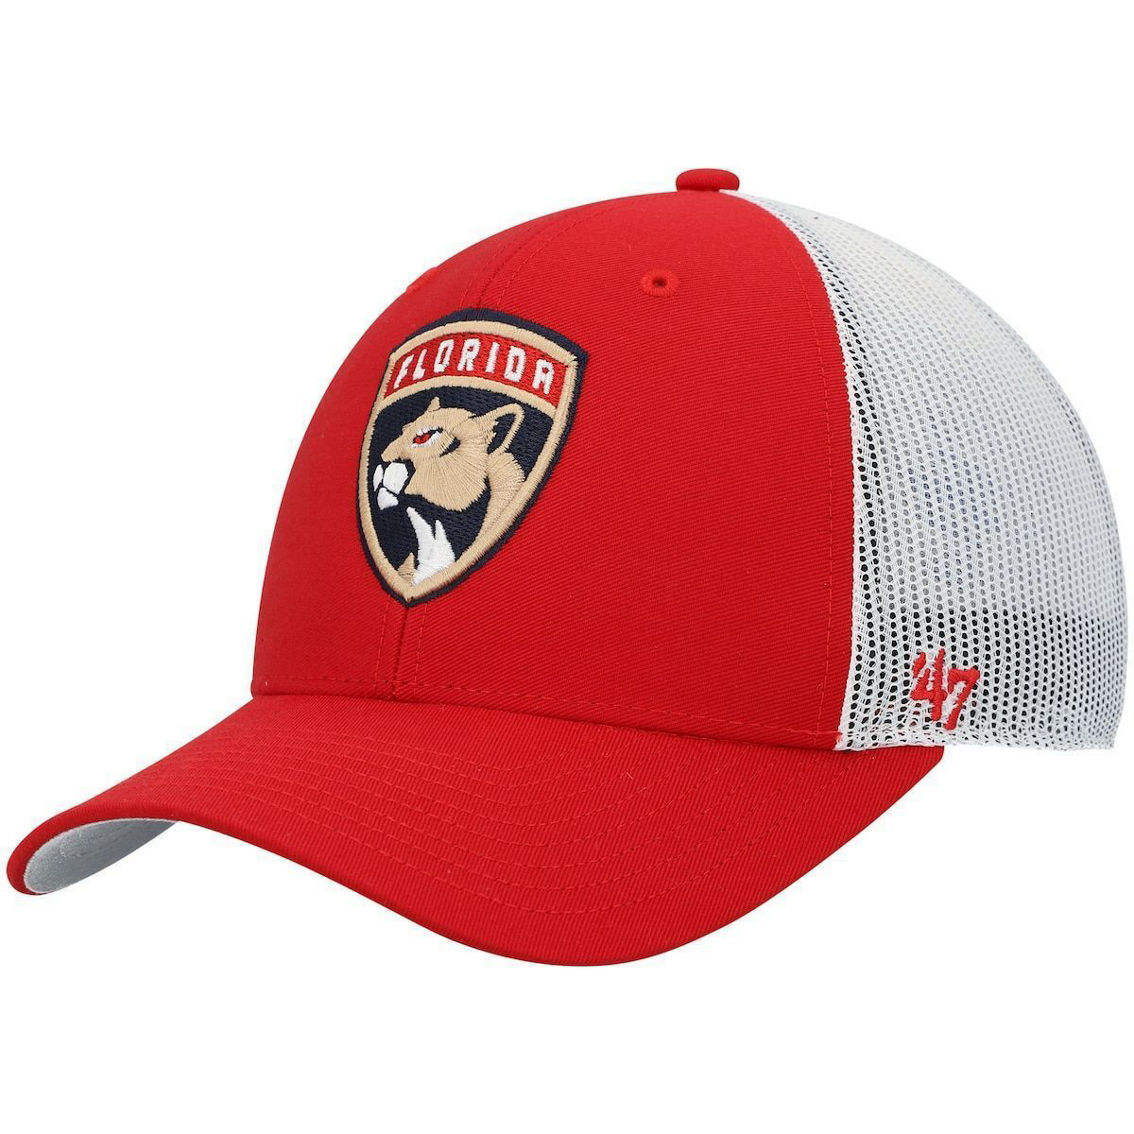 '47 Men's Red Florida Panthers Trawler Clean Up Trucker Adjustable Snapback Hat - Image 2 of 4